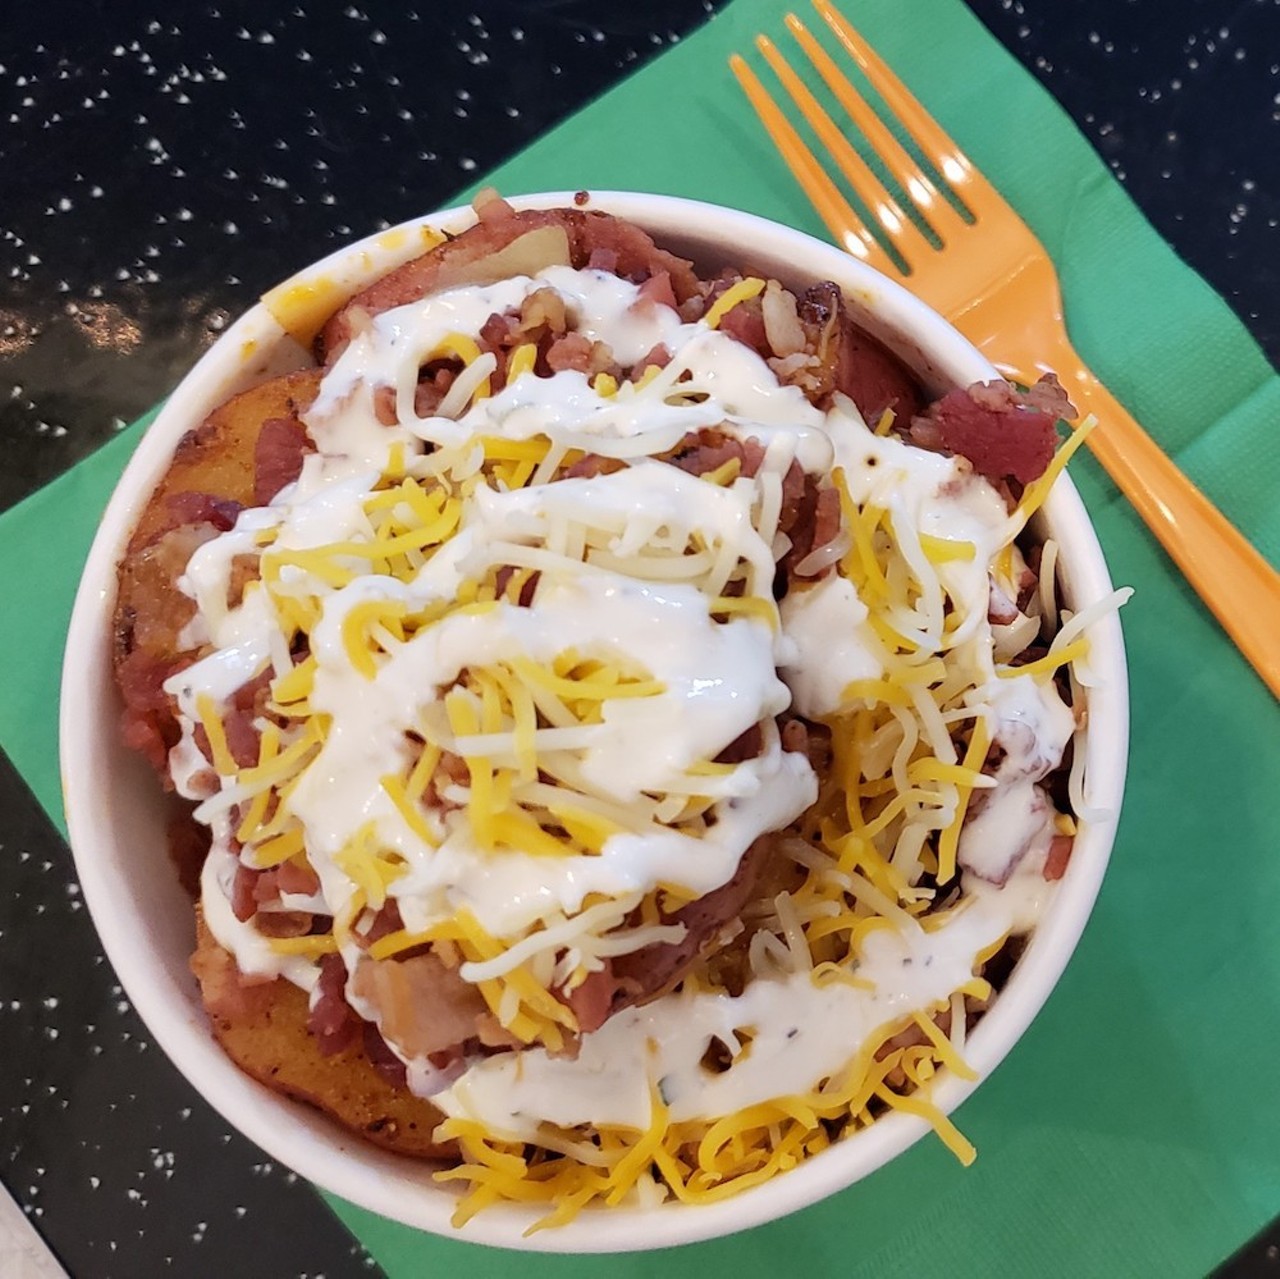 Classic Loaded Potato Bowl
A down-home medley of seasoned potatoes, crispy bacon, Cheddar and herb sour cream from Ma's Irish Kitchen.